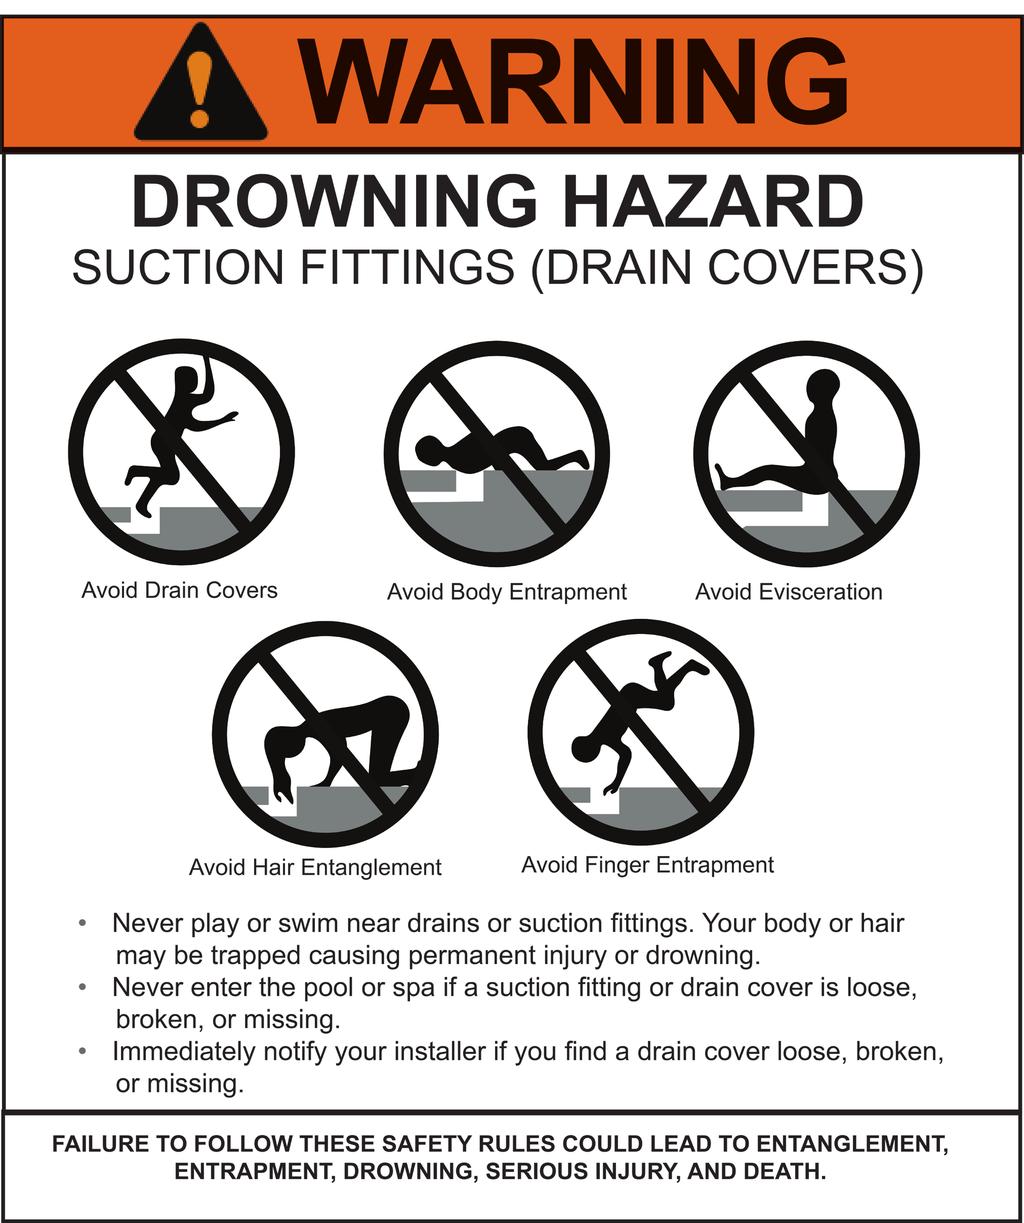 ATTACHMENT B General Warnings, Signs, and Stickers Safety sign instructions: Cut, laminate, and post this safety sign in an